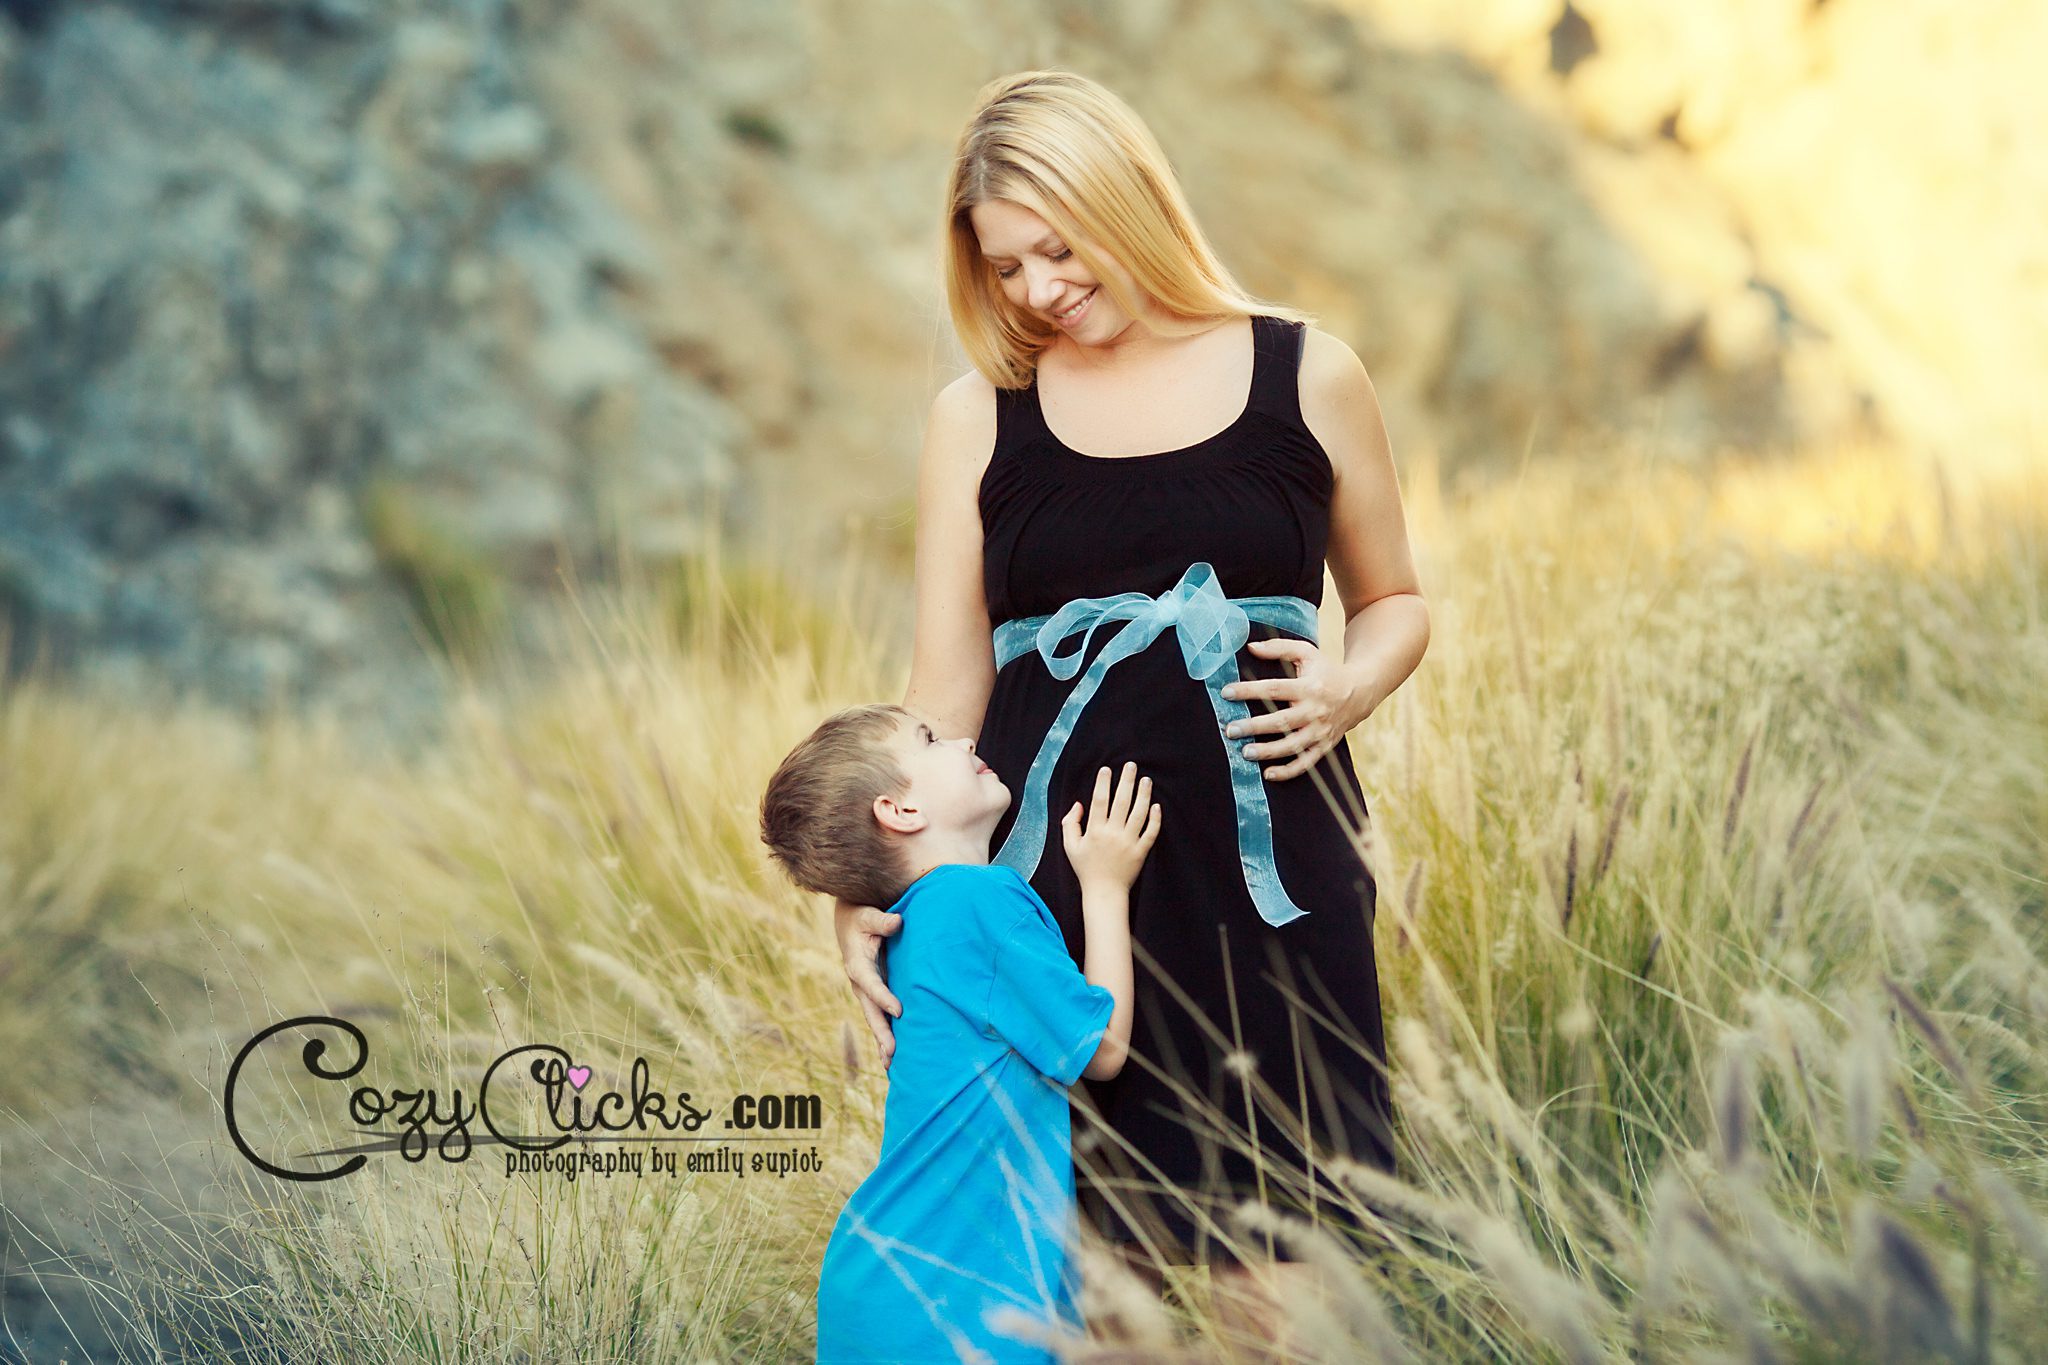 Gender Reveal Photo session in Ahwatukee